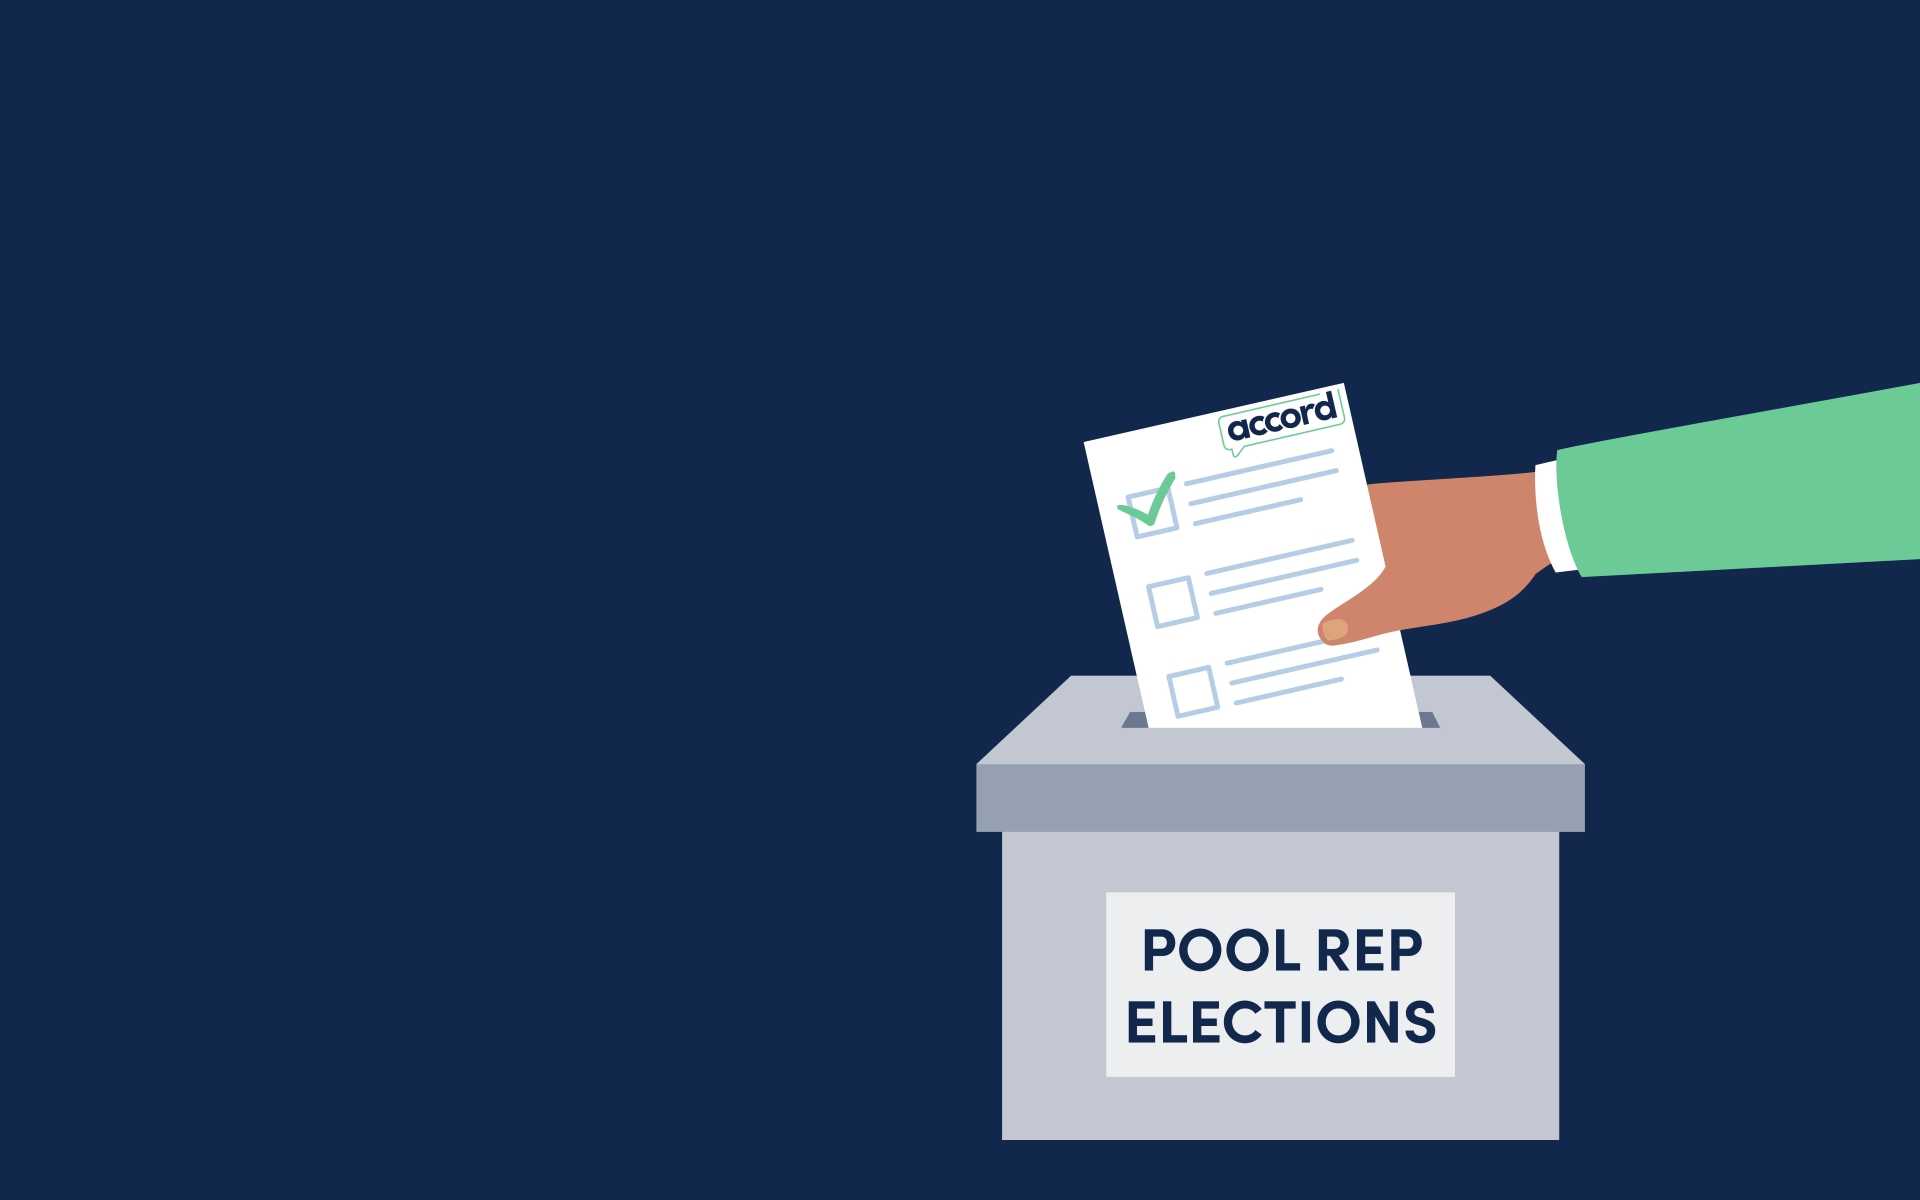 Ballot box for pool rep elections with a hand posting a completed ballot. On a blue block background